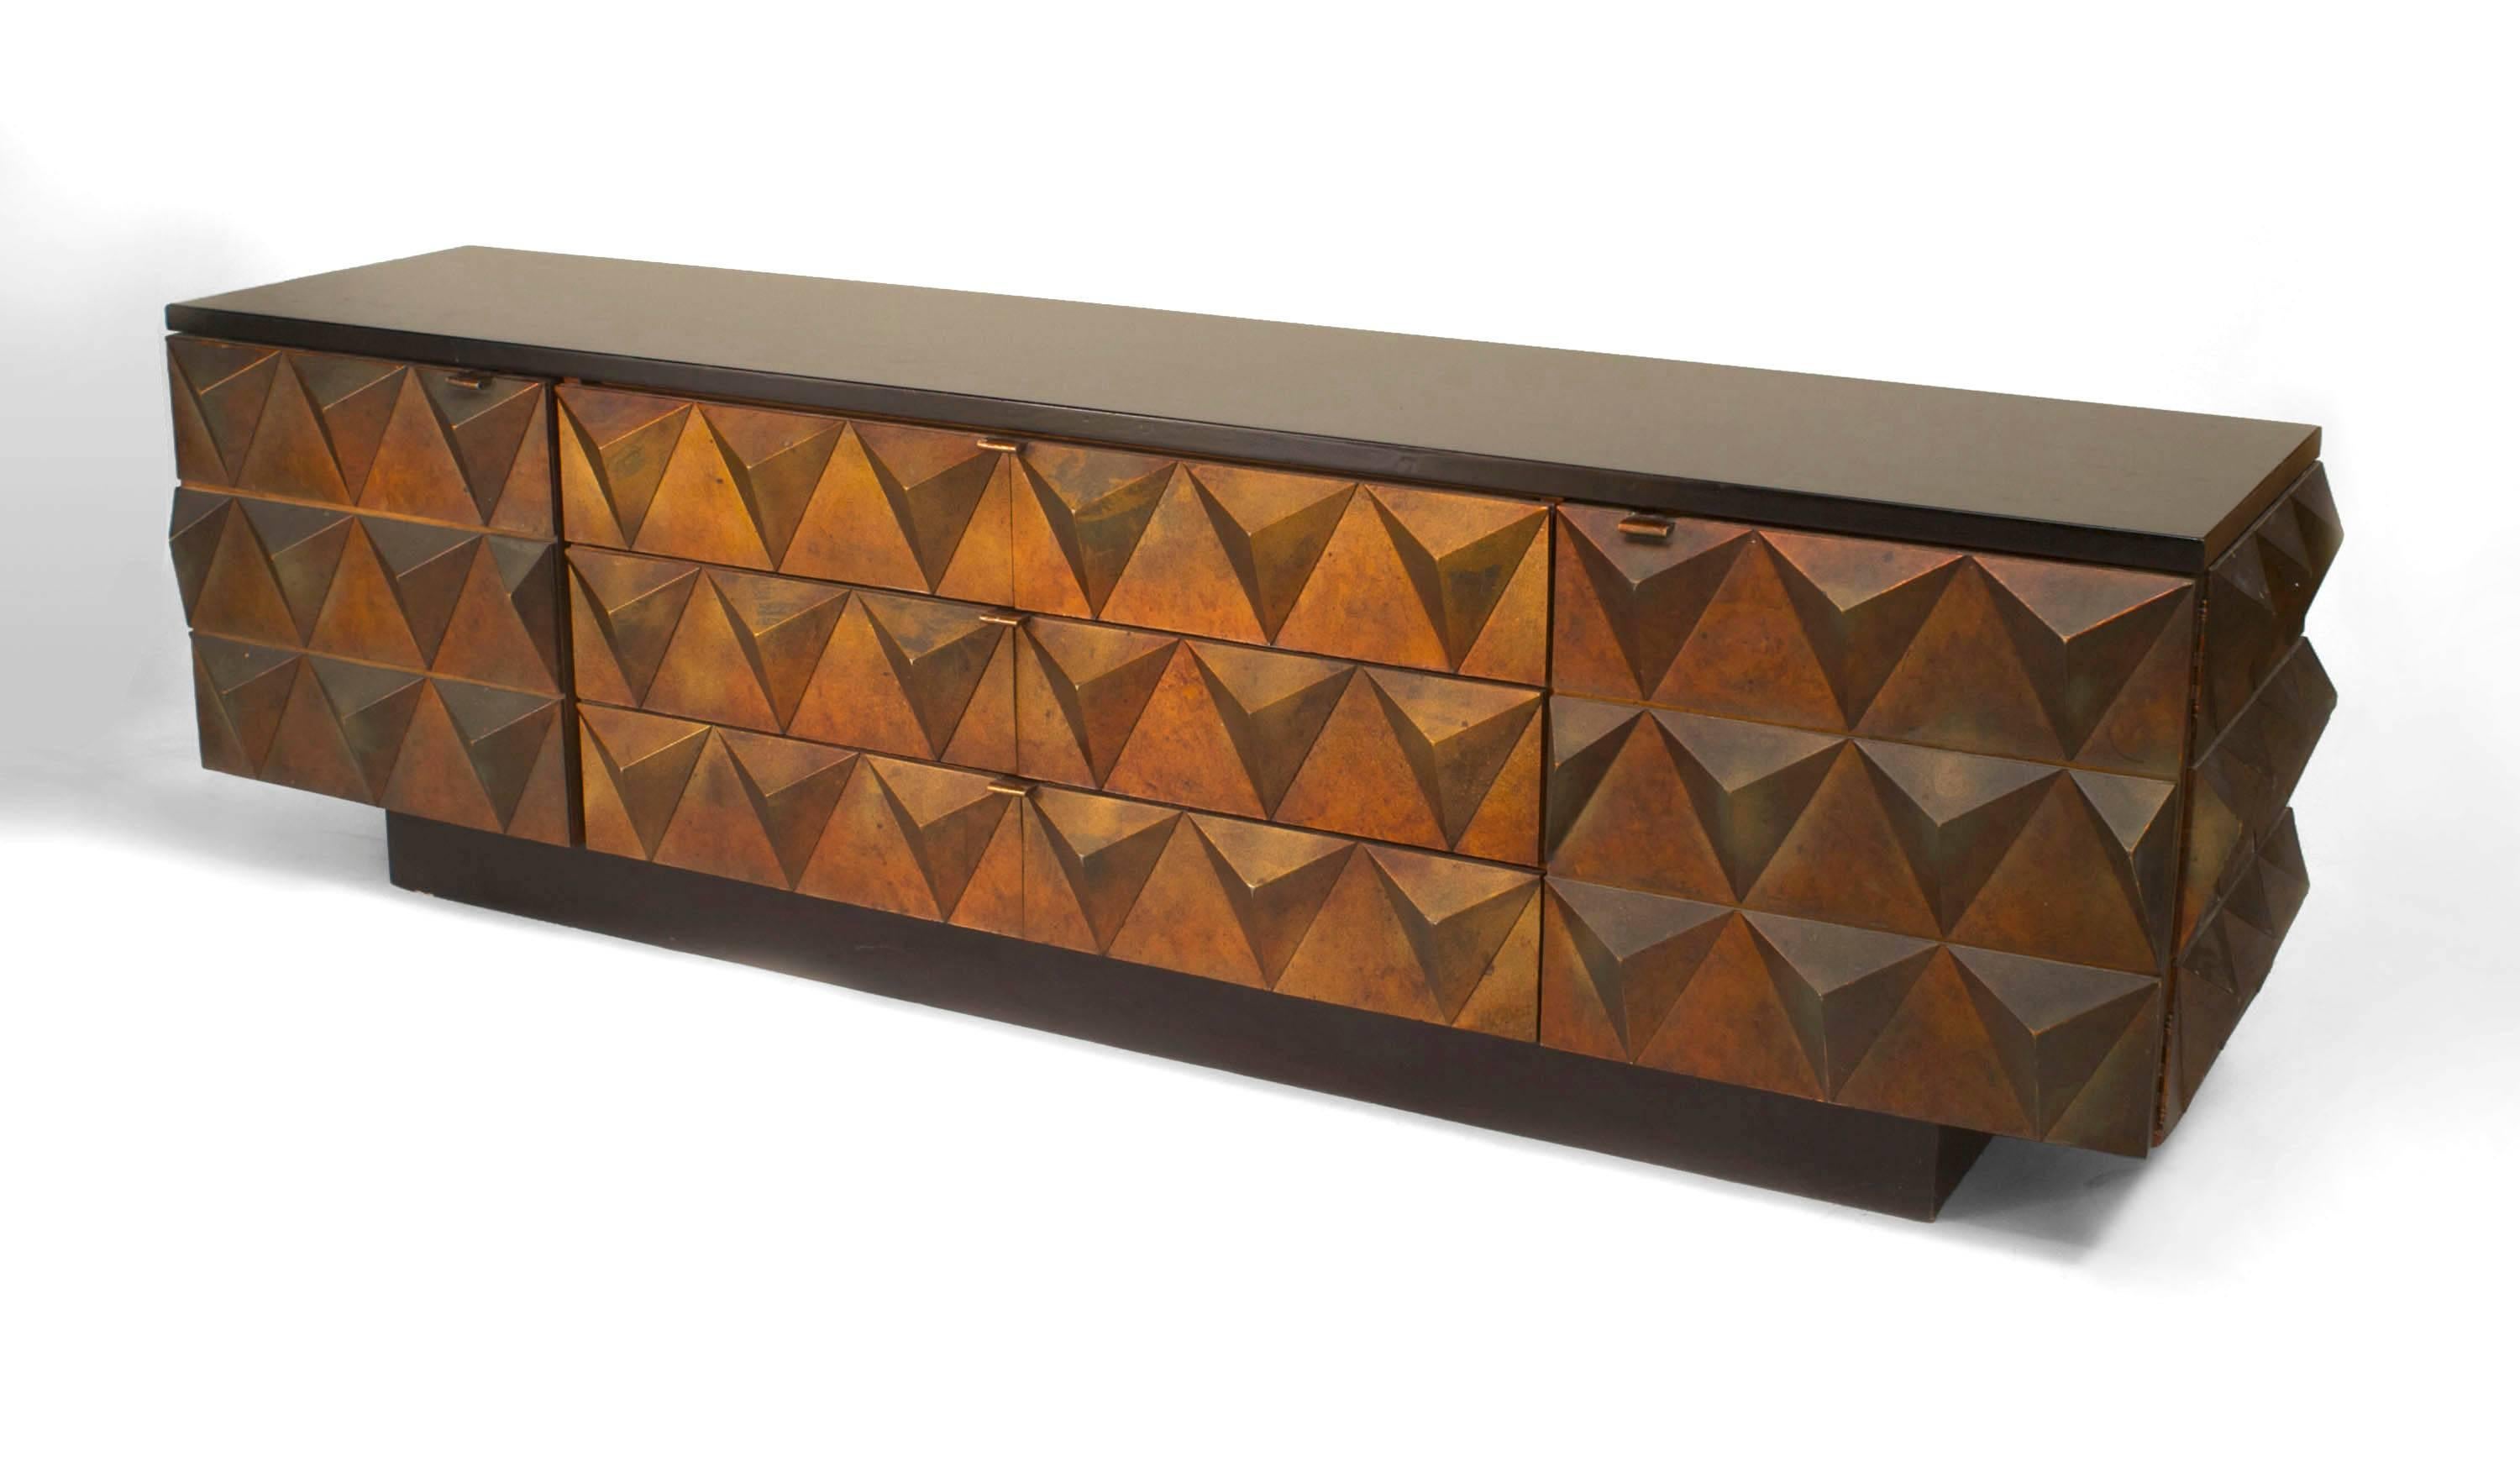 Italian Post-War Design Modernist low sideboard cabinet with copper polychromed pyramid design having 2 doors centering 3 drawers with an ebonized platform base and top.
